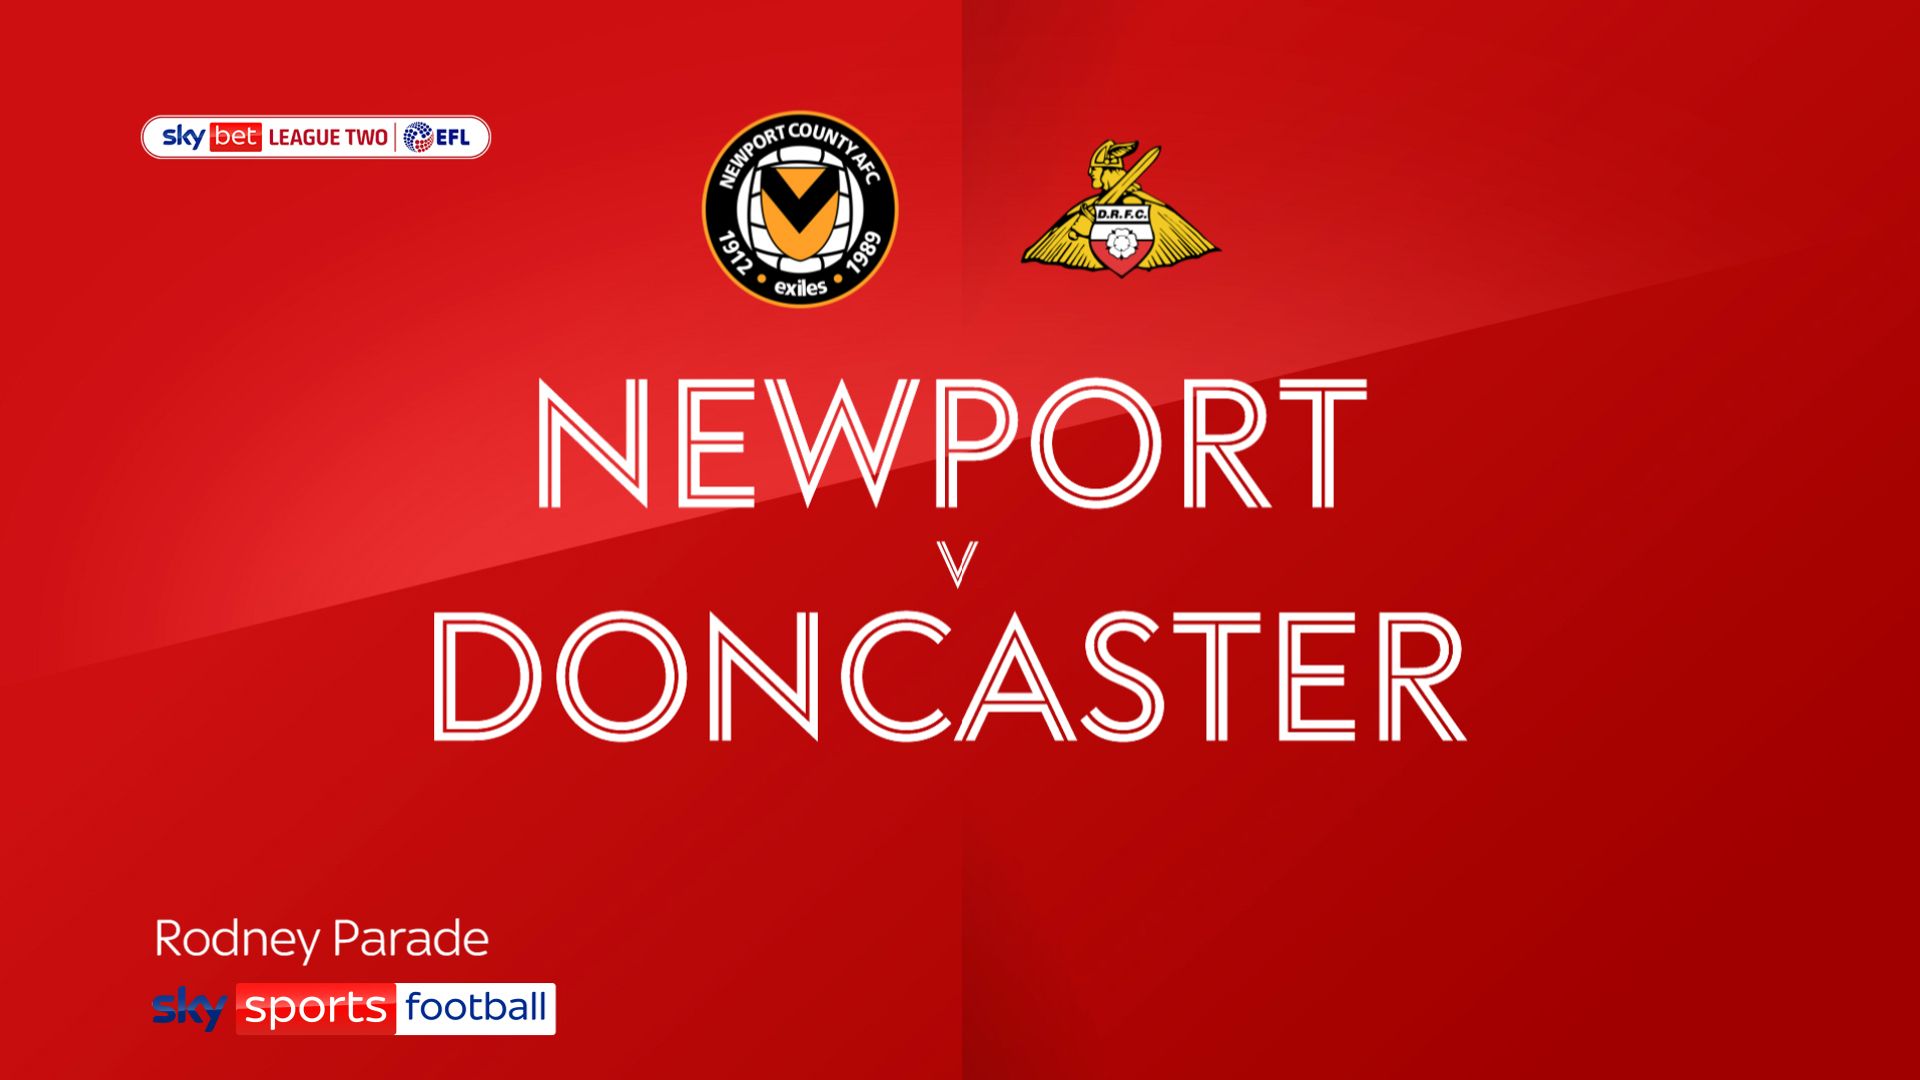 Knoyle steers Doncaster past Newport